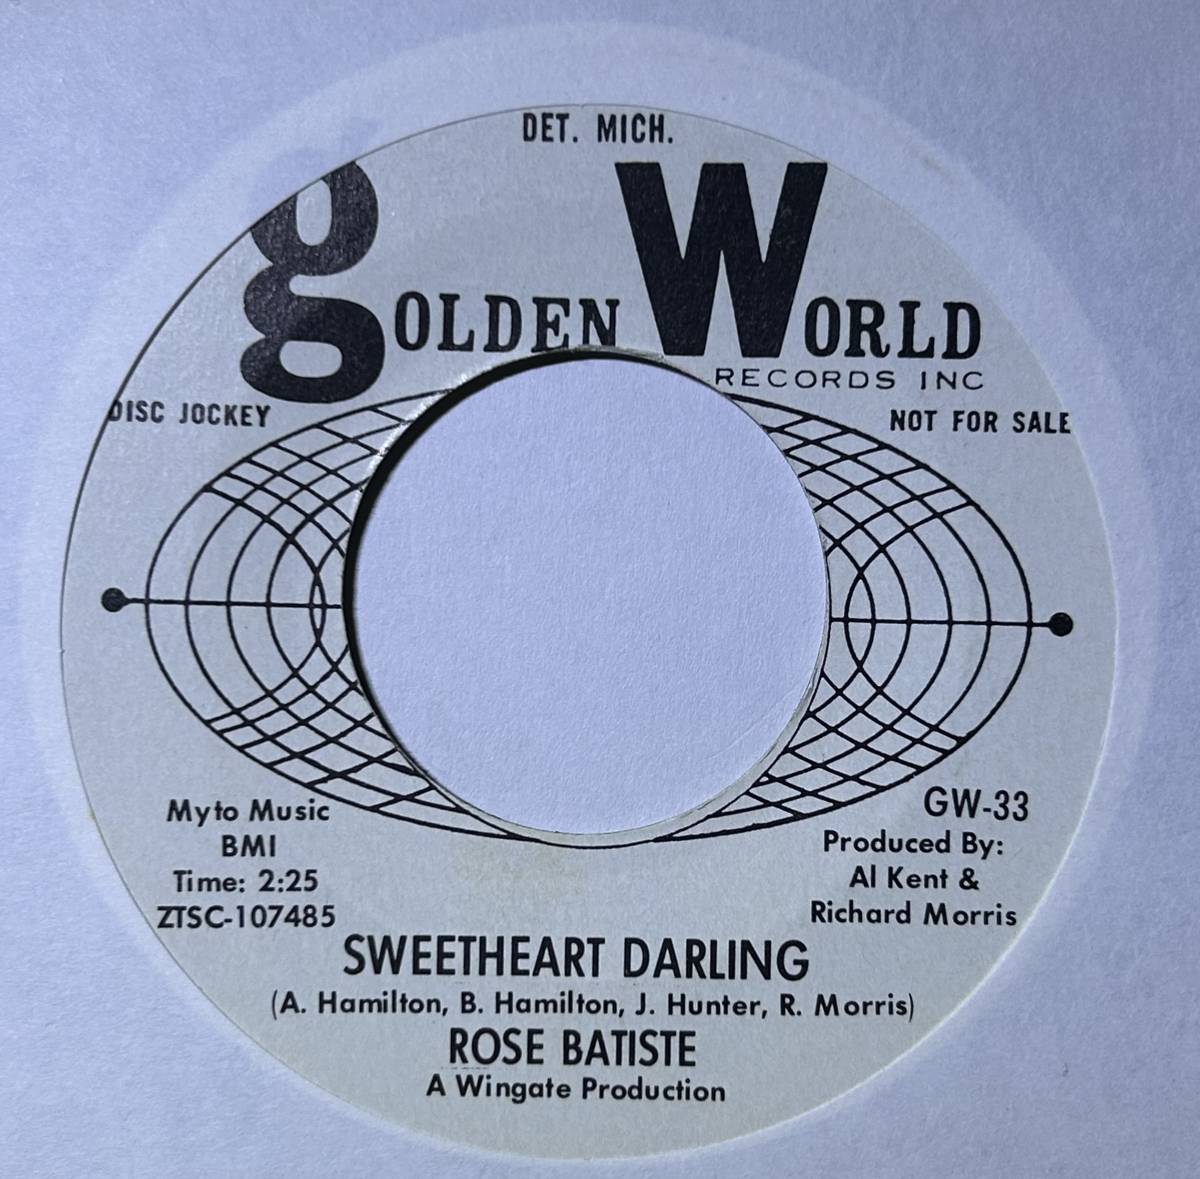 Rose Batiste 「Sweetheart Darling / That's What He Told Me」 soul45 ノーザンソウル 7インチ